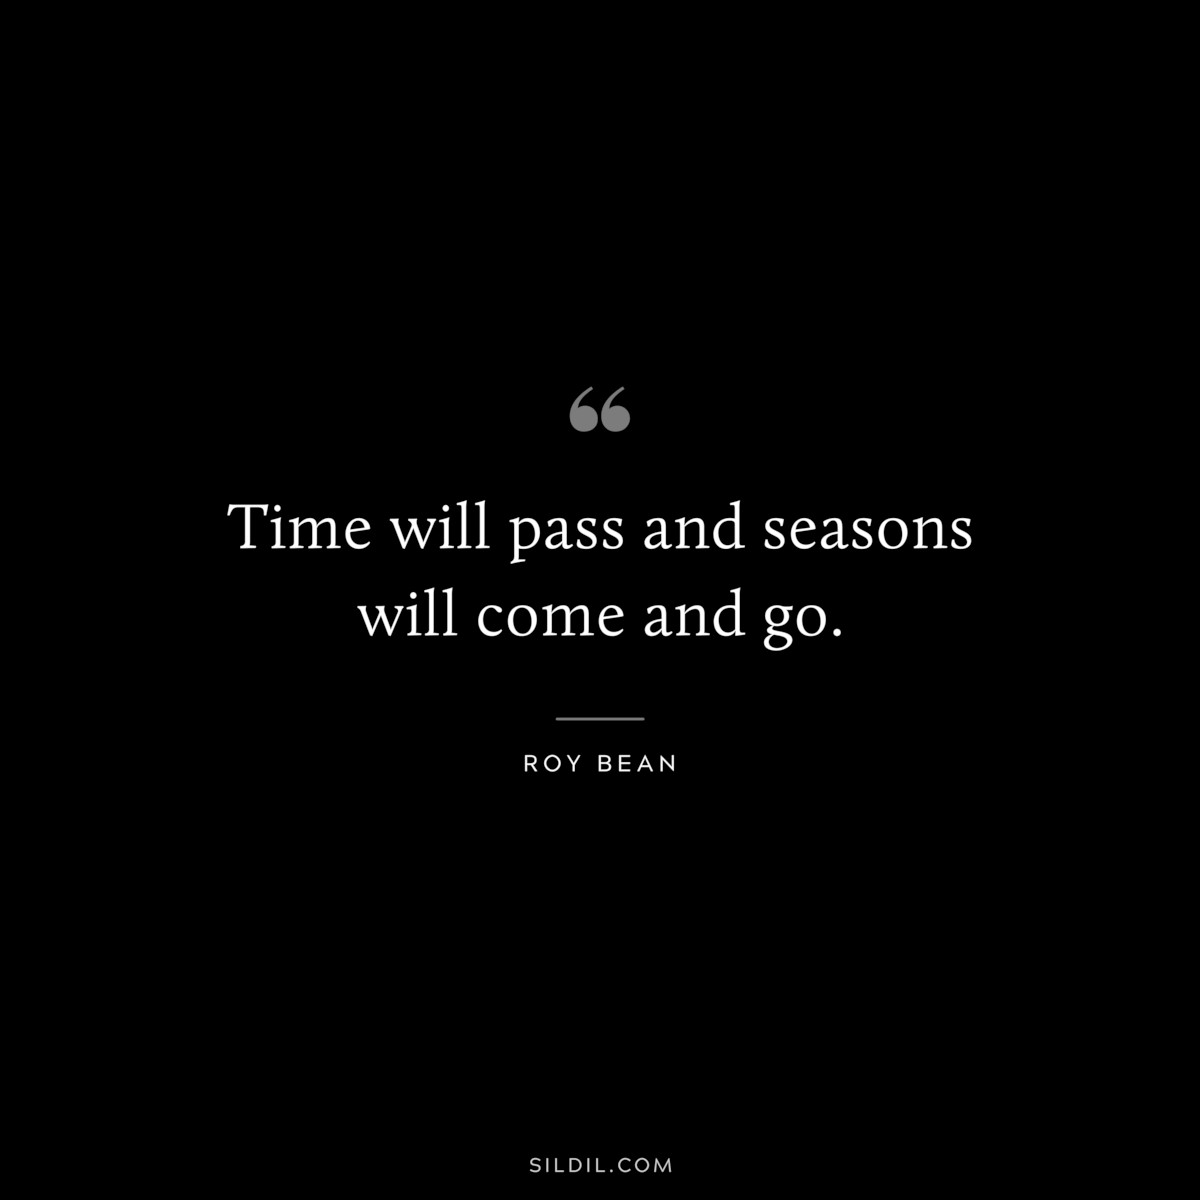 Time will pass and seasons will come and go. ― Roy Bean